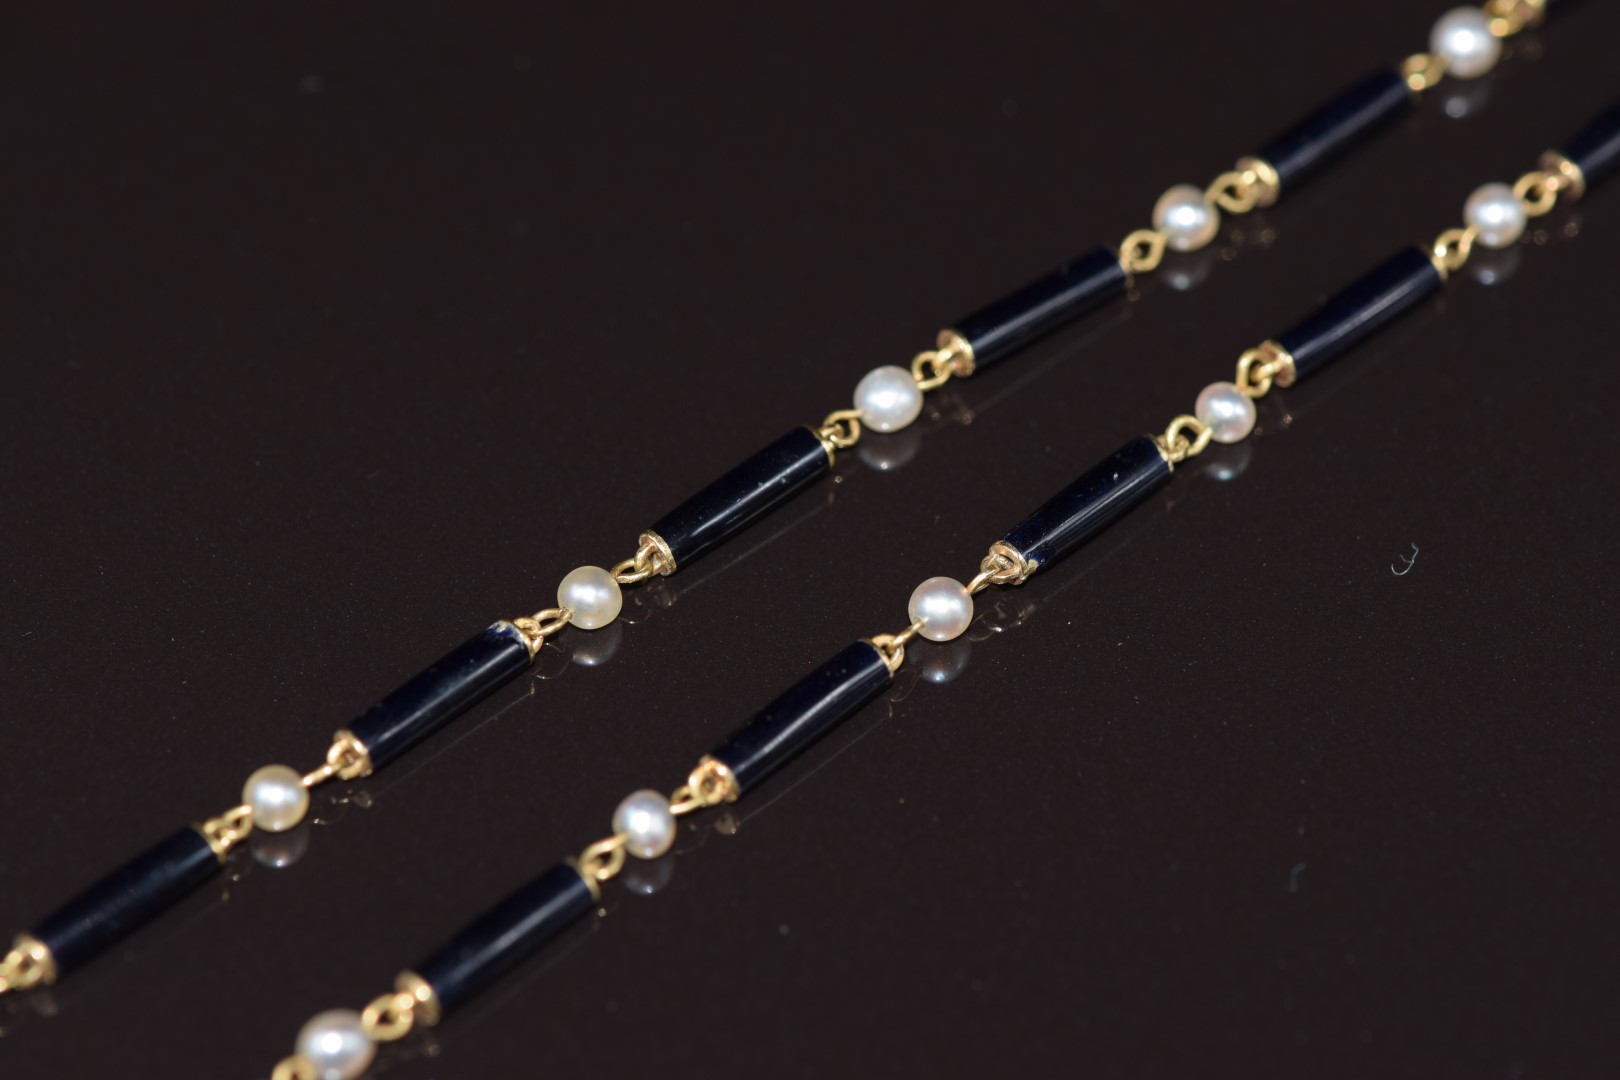 Victorian 9ct gold chain made up of alternating natural pearls and black enamel barrel links, 9.